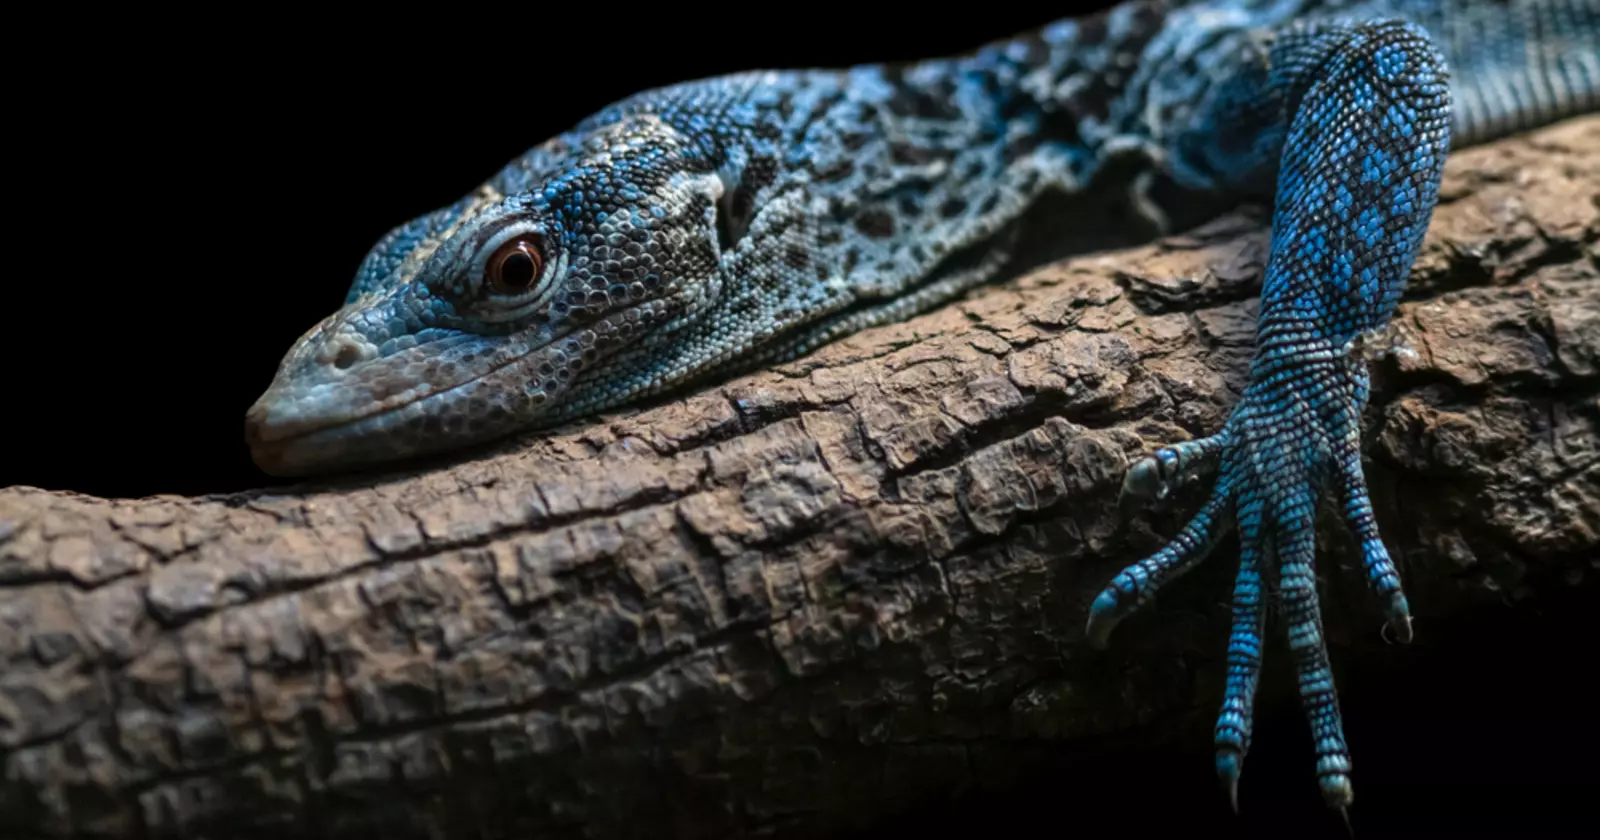 Blue tree monitor on a branch